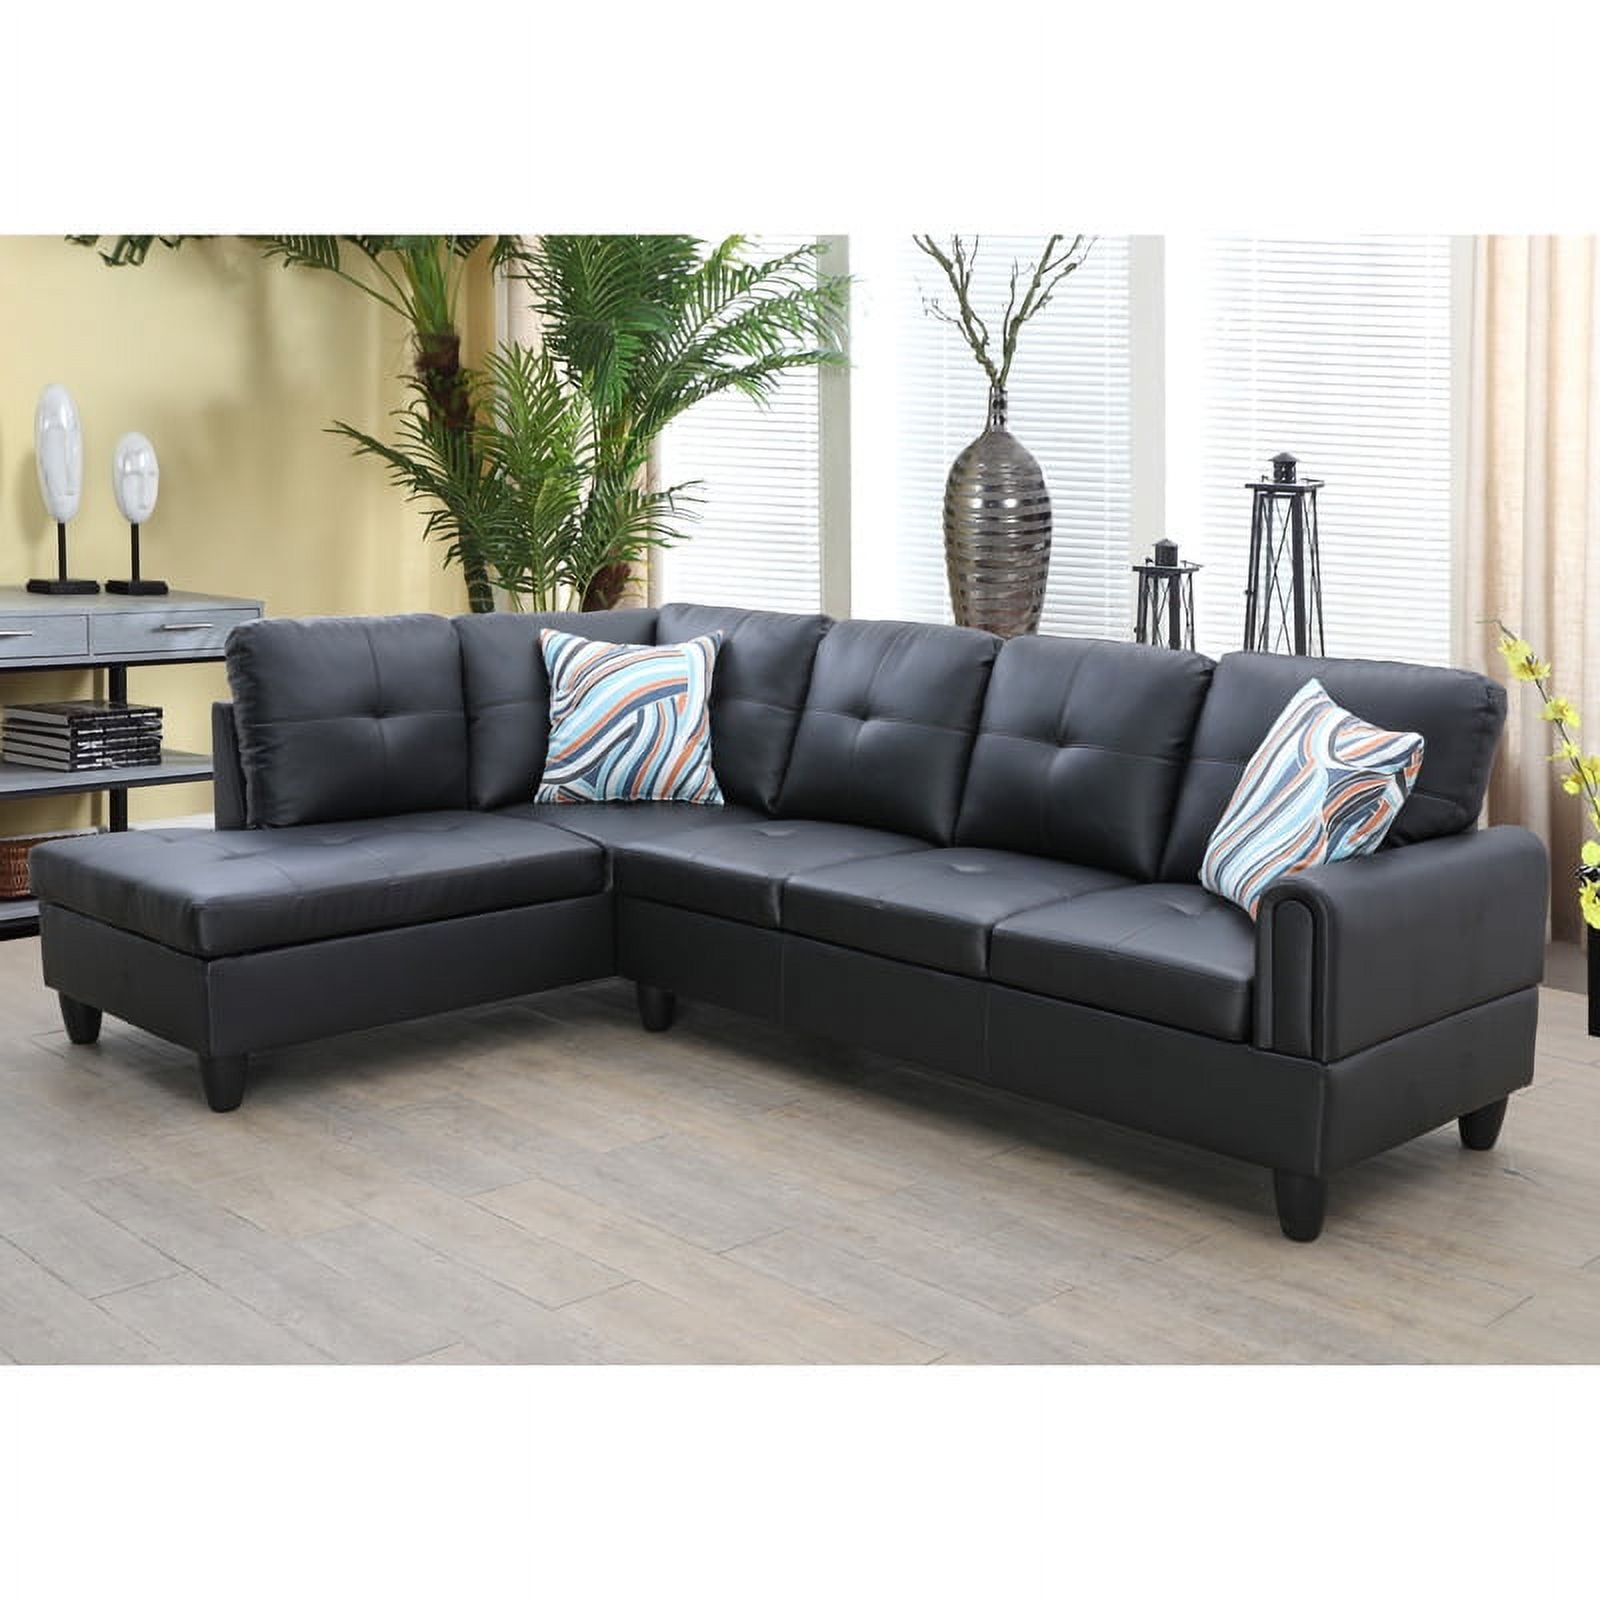 Hommoo Faux Leather 3 Piece Couch Living Room Sofa Set, L Shaped Couch For  Small Space, Black(Without Ottoman) – Walmart With 3 Piece Leather Sectional Sofa Sets (View 8 of 15)